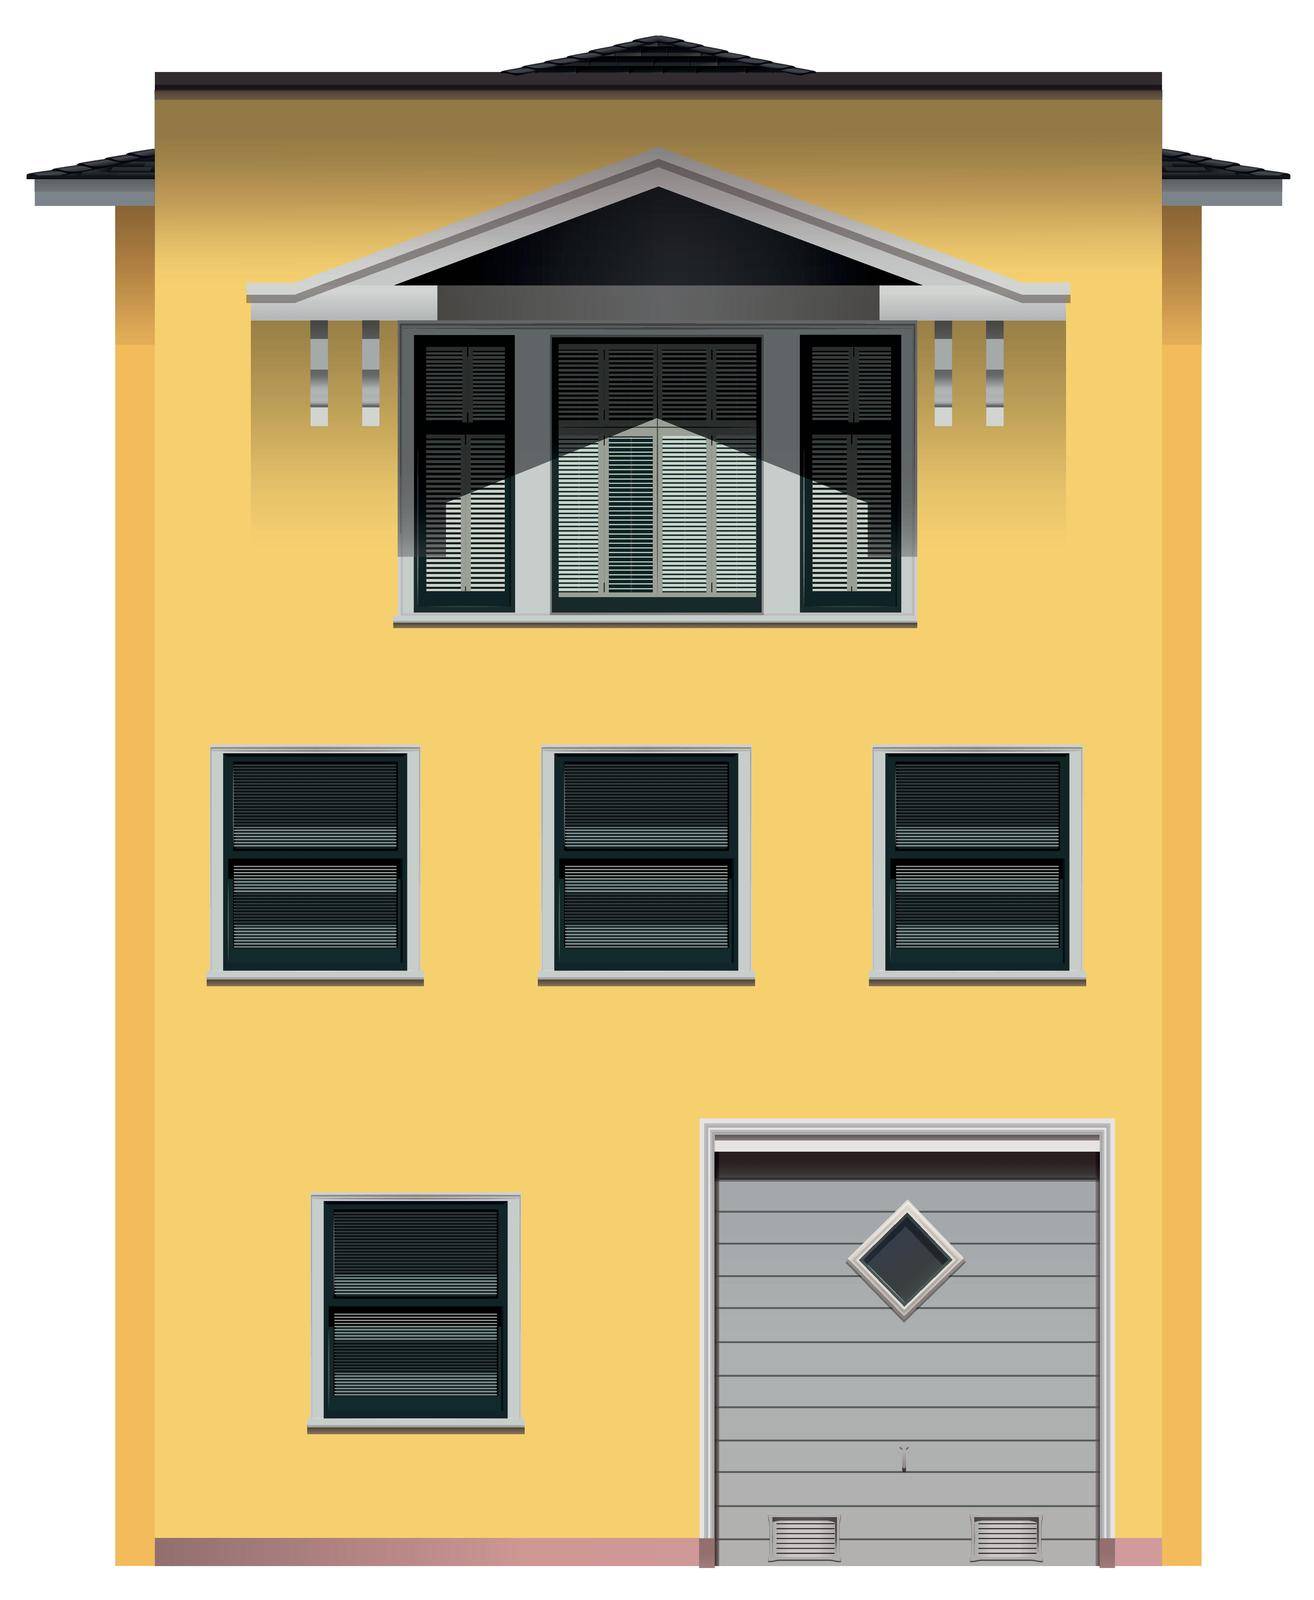 Illustration of a single yellow house